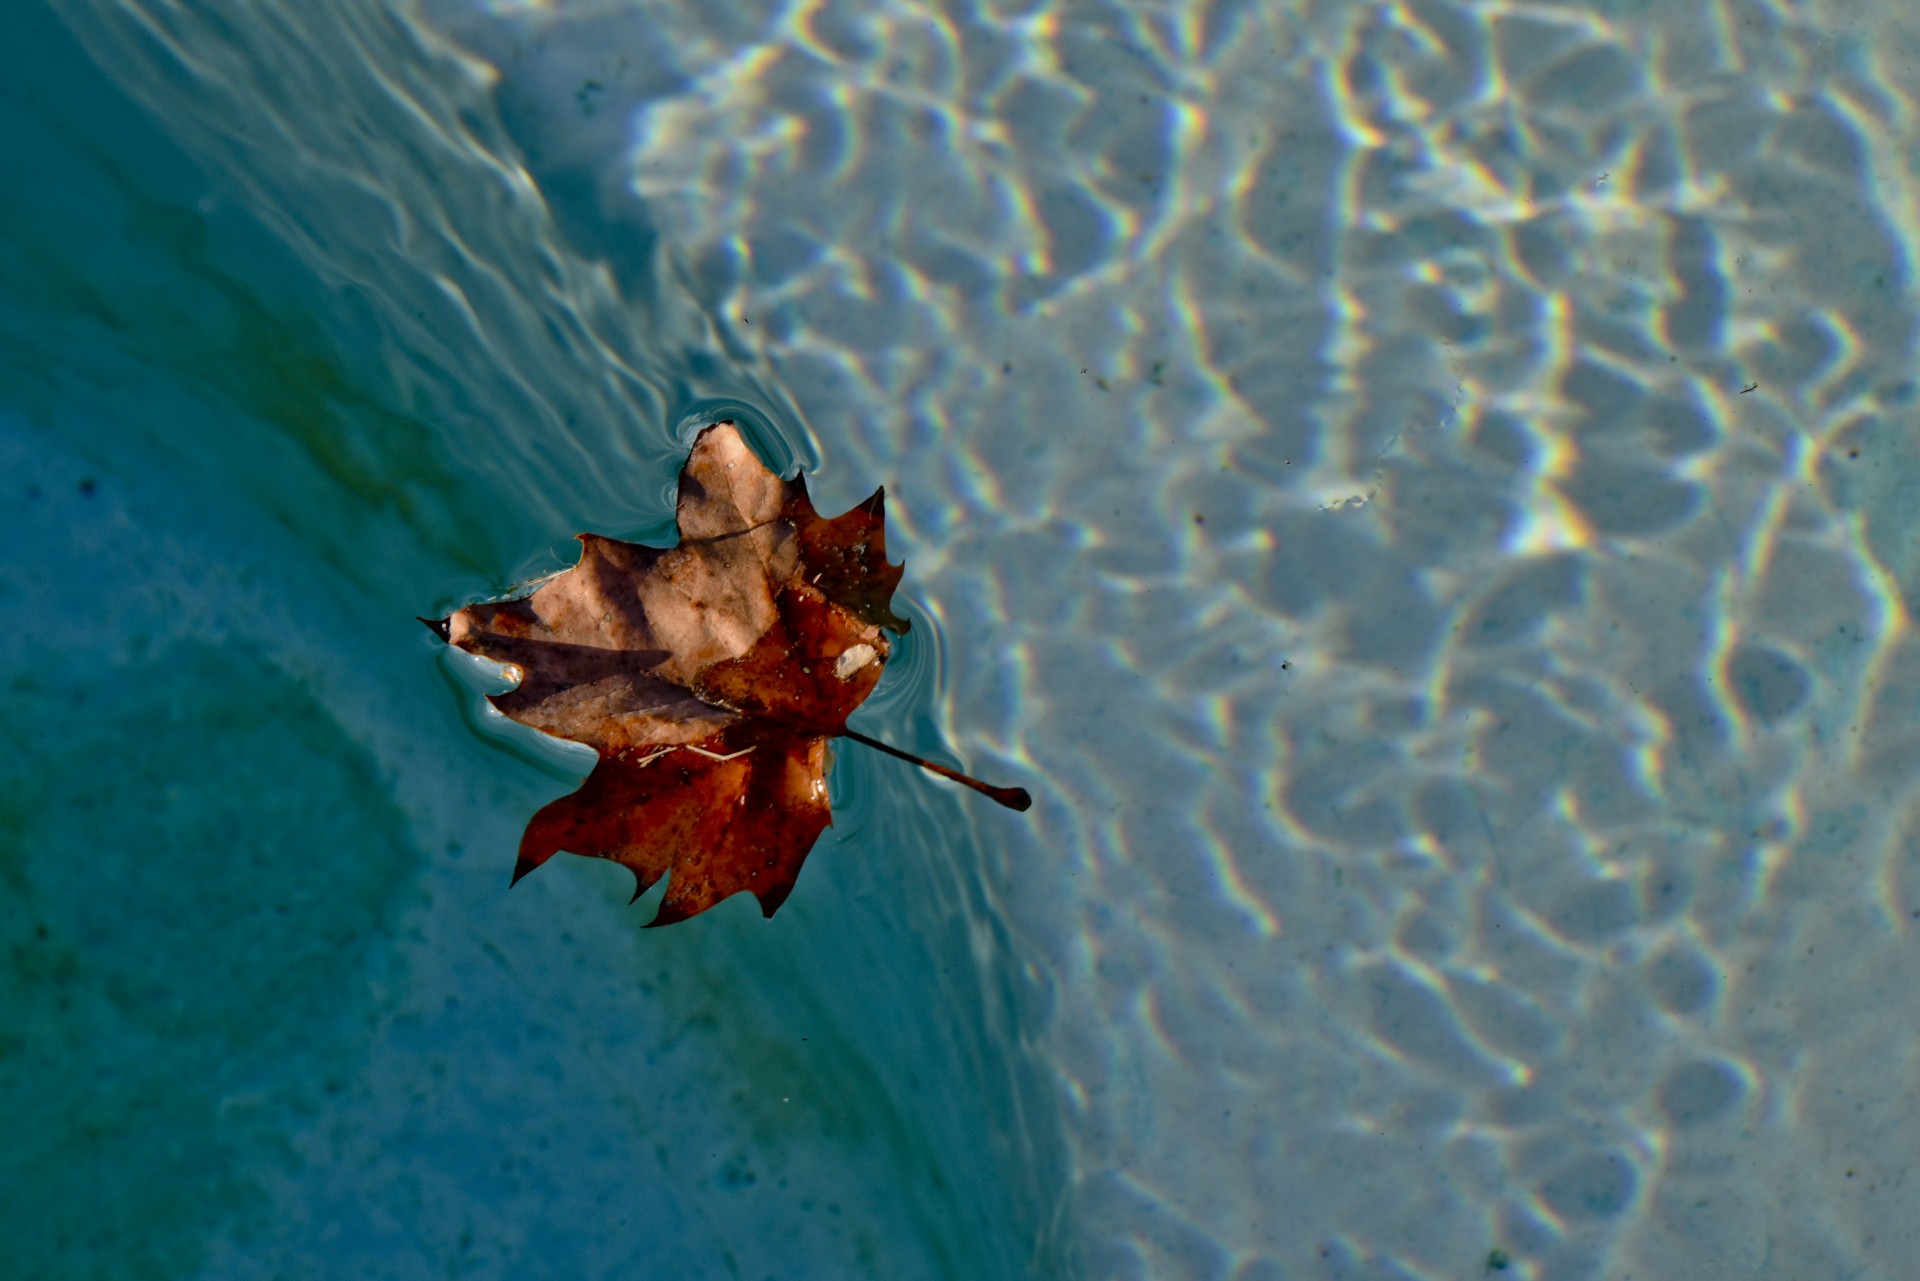 A leaf floats on the water of a jacuzzi